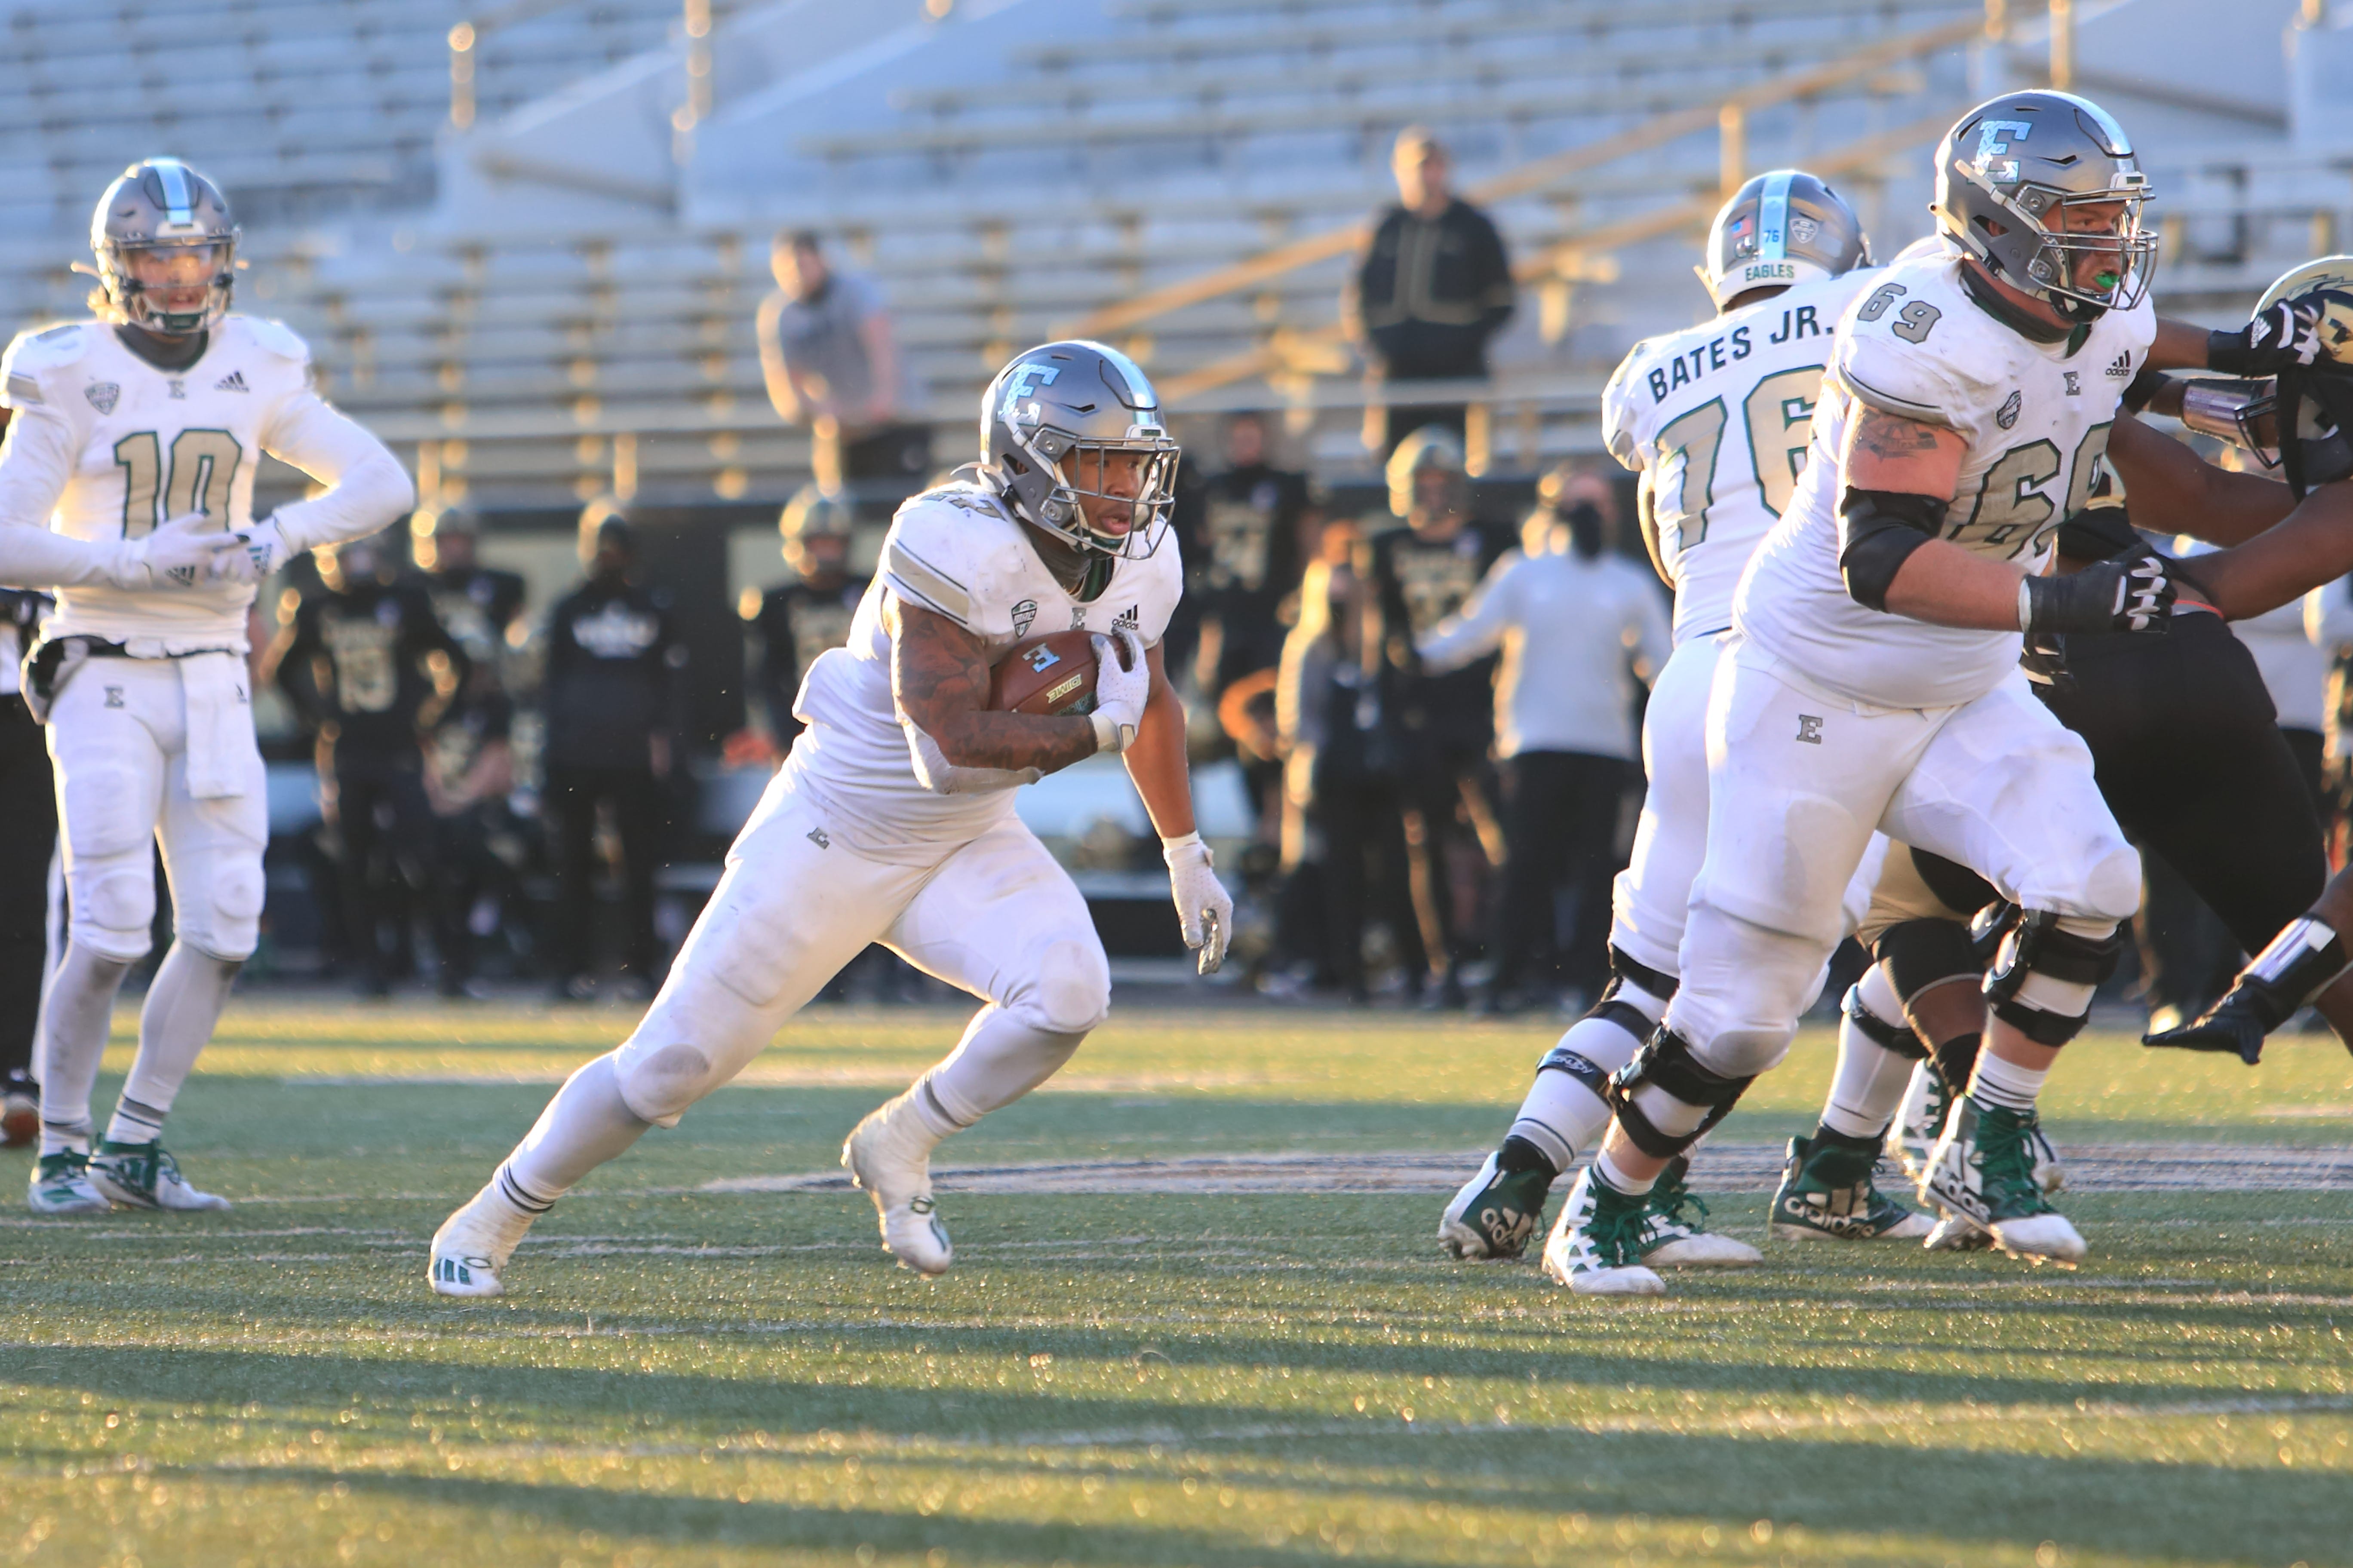 Darius Boone ran for 148 yards and a touchdown on 25 carries in Eastern Michigan's 53-42 win over Western Michigan on Saturday.